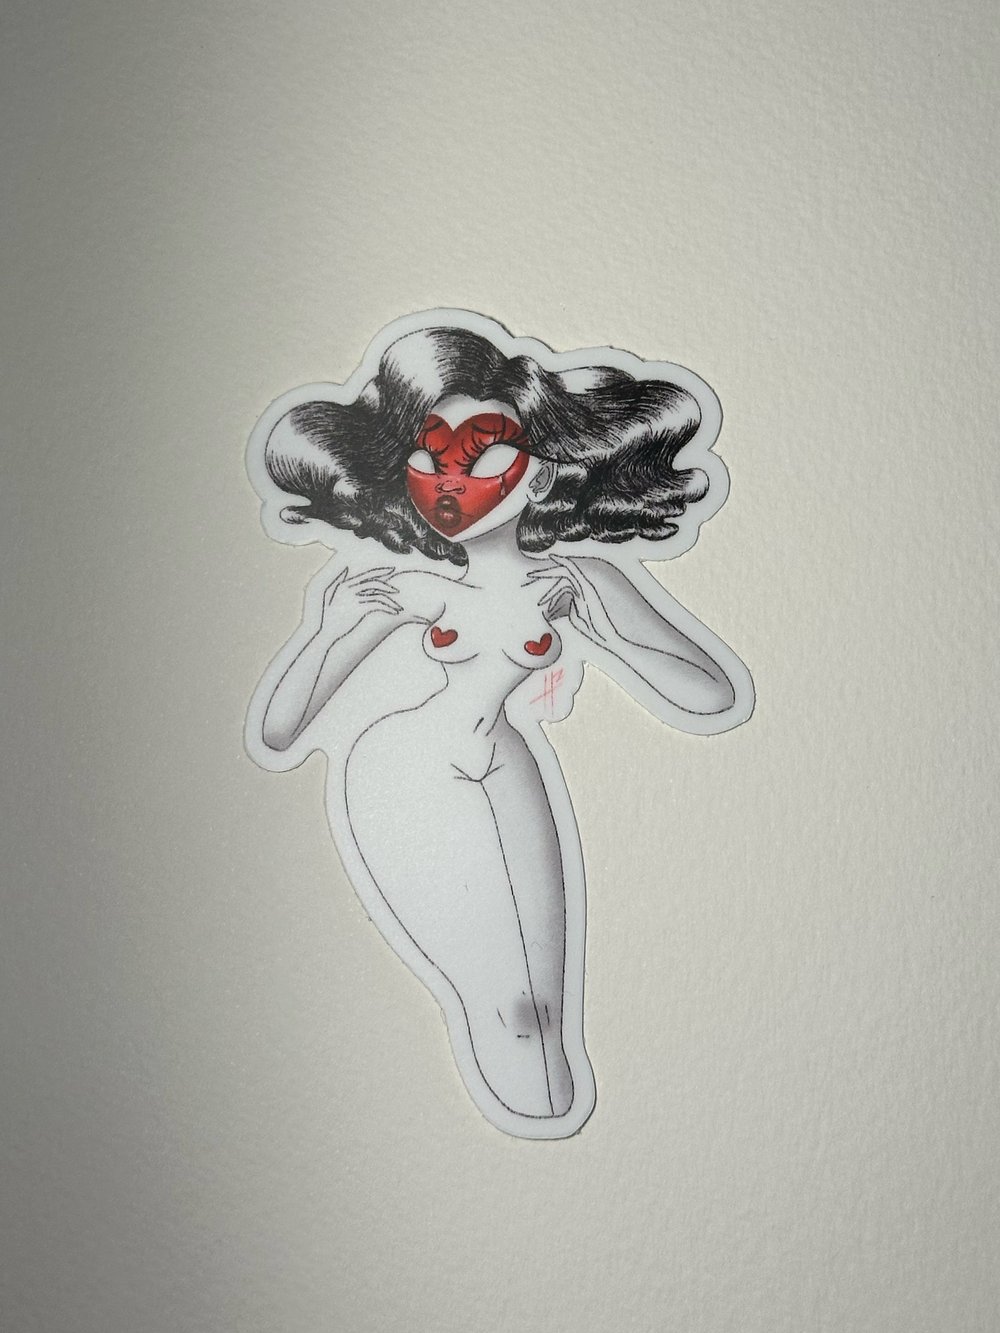 Image of “The Lover” Sticker